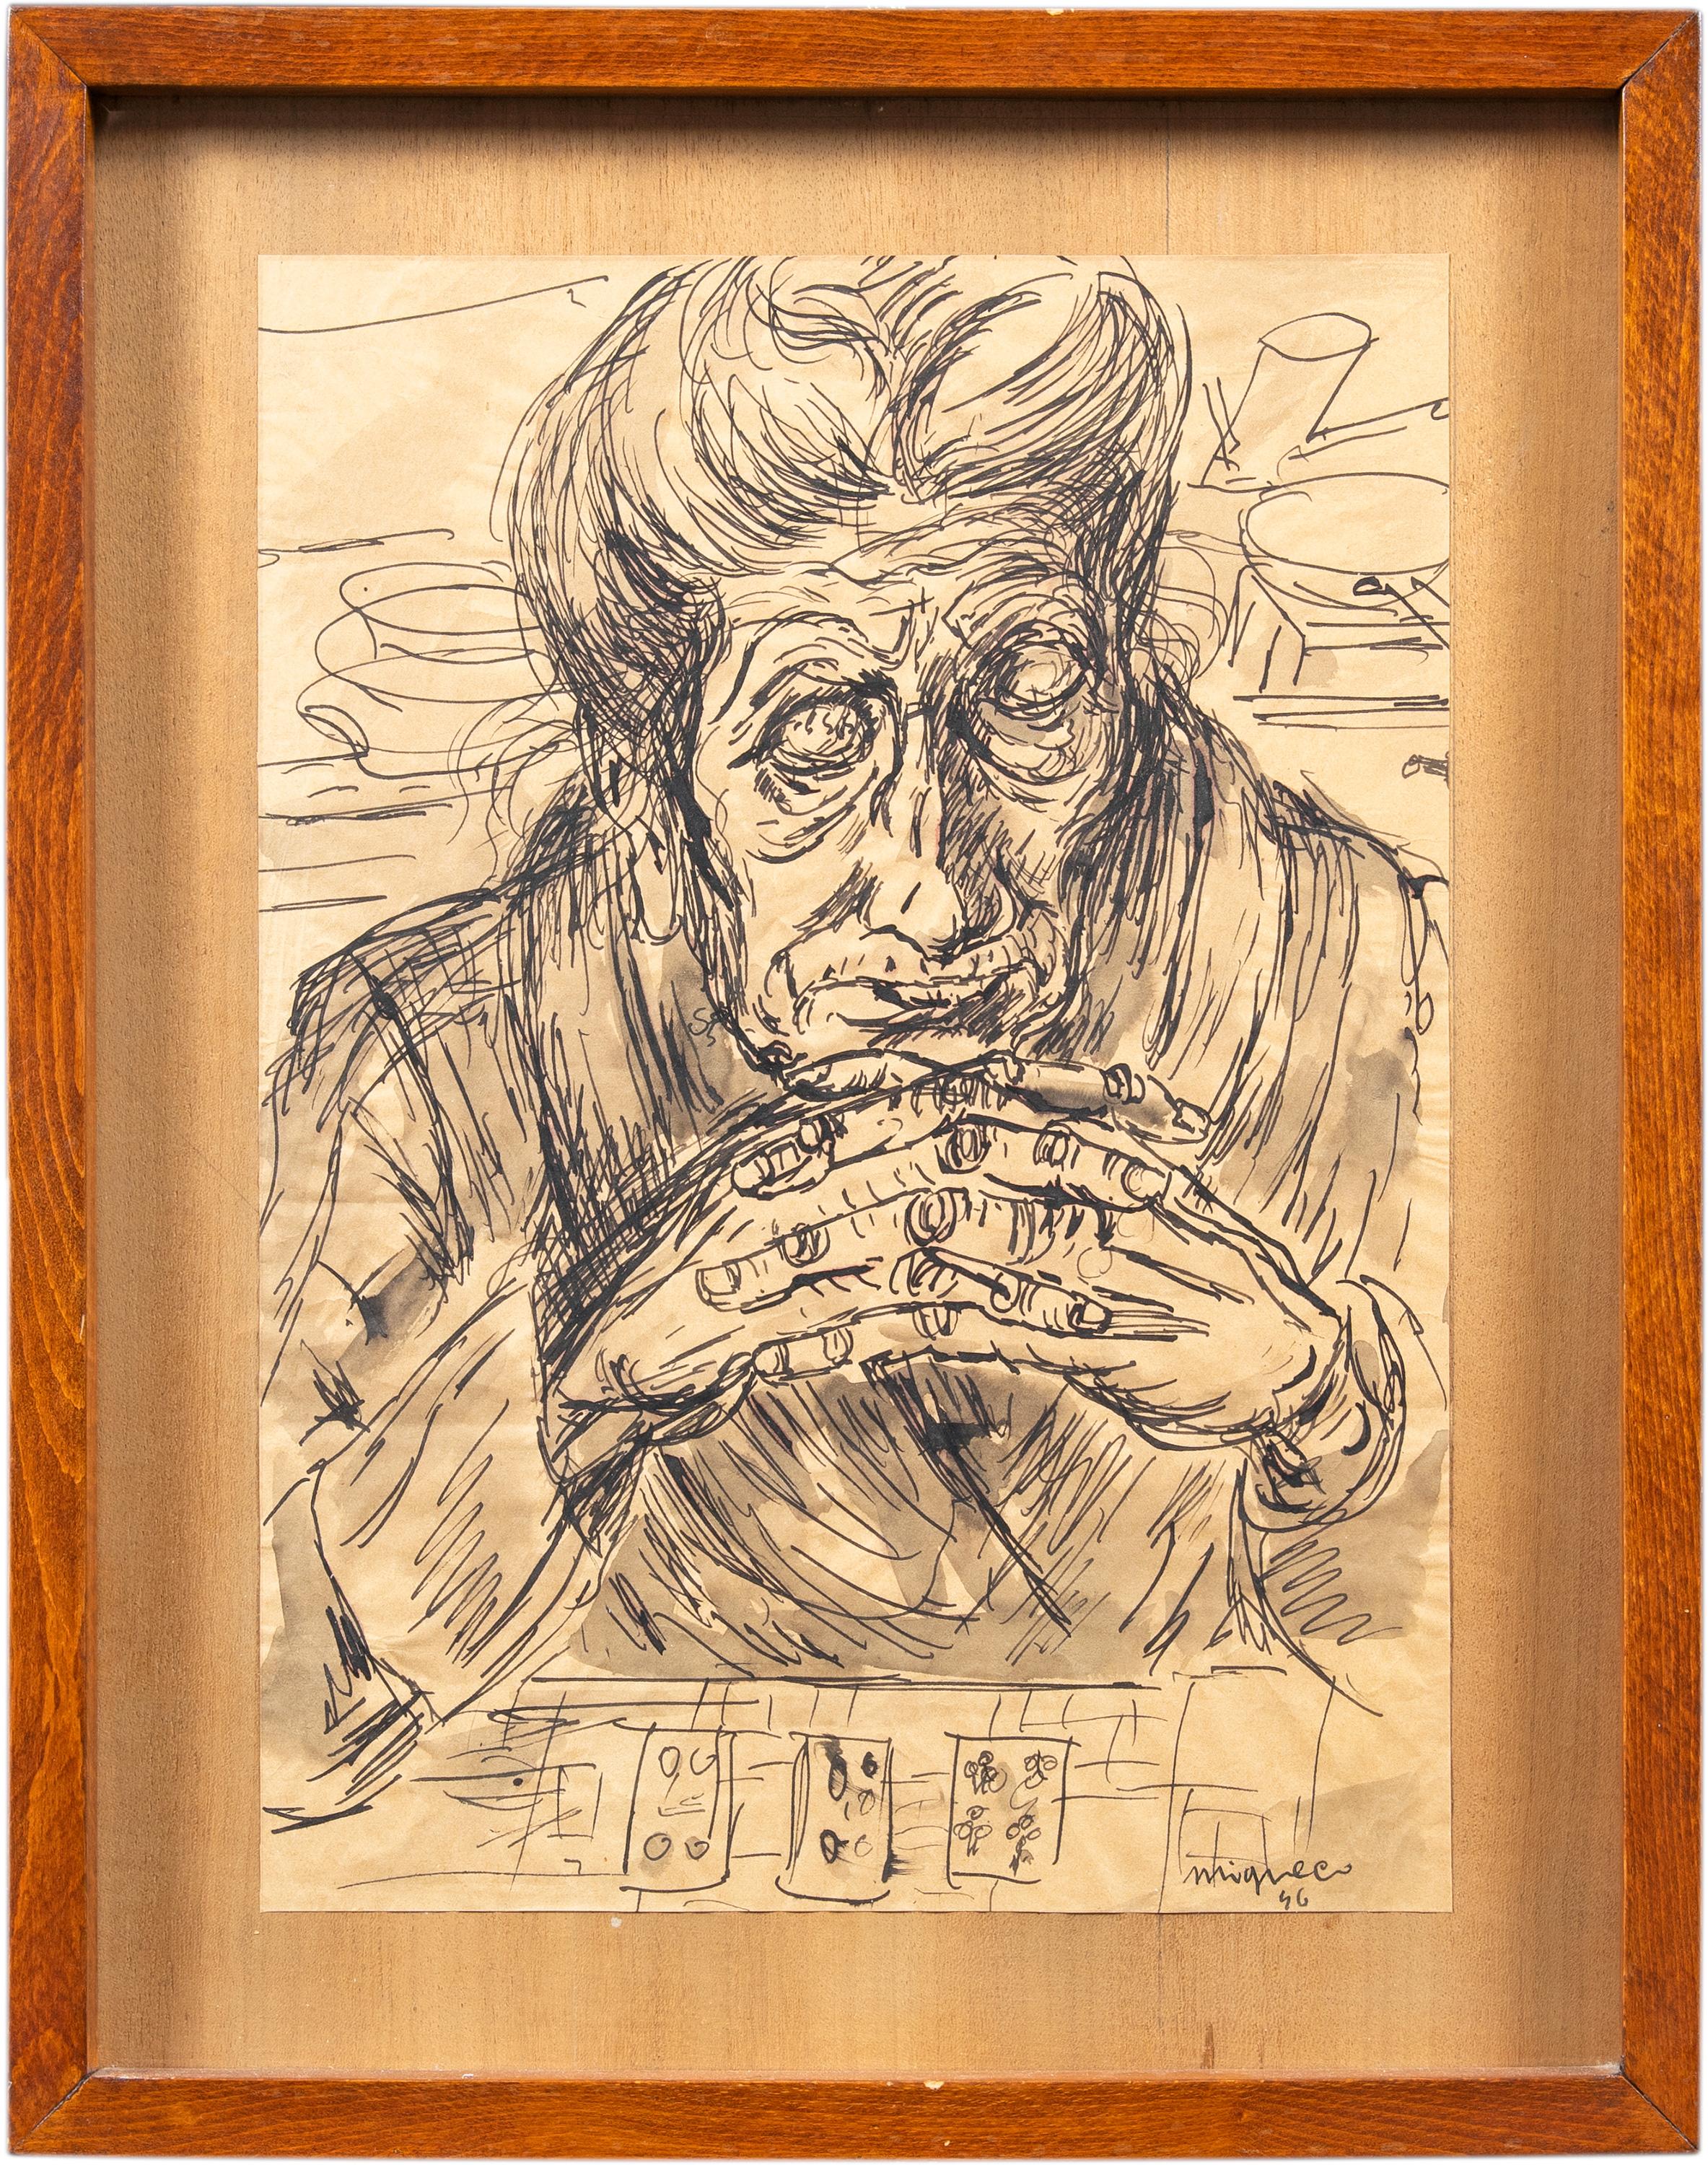 Giuseppe Migneco (Messina 1903 - Milan 1997) - The fortune teller.

49.5 x 39.5 cm without frame, 52.5 x 40.5 cm with frame.

Antique mixed technique drawing on paper, in wooden frame.

- Work signed and dated on the lower right: “Migneco